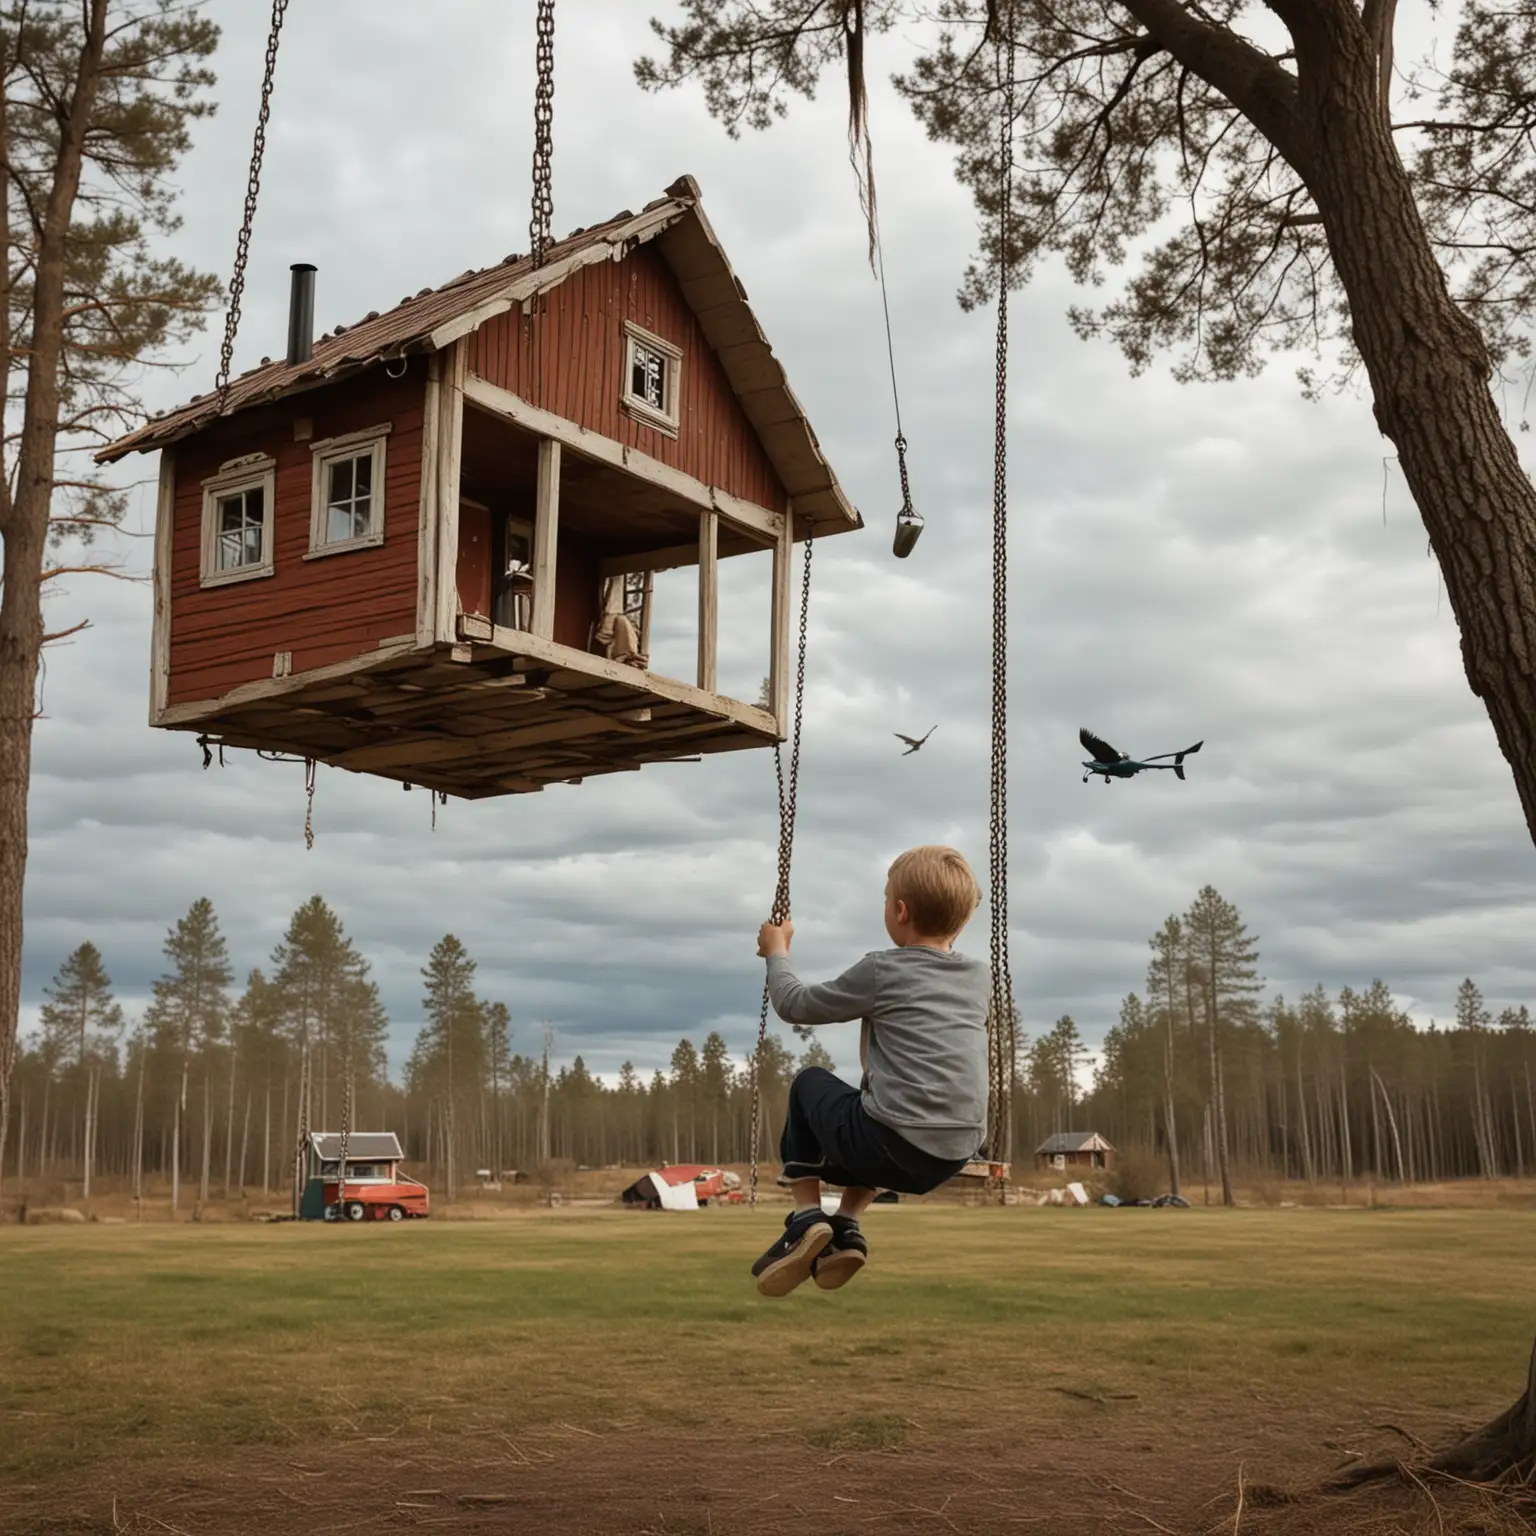 Swedish Youth Boy Swinging with Eerie Flying House in Background